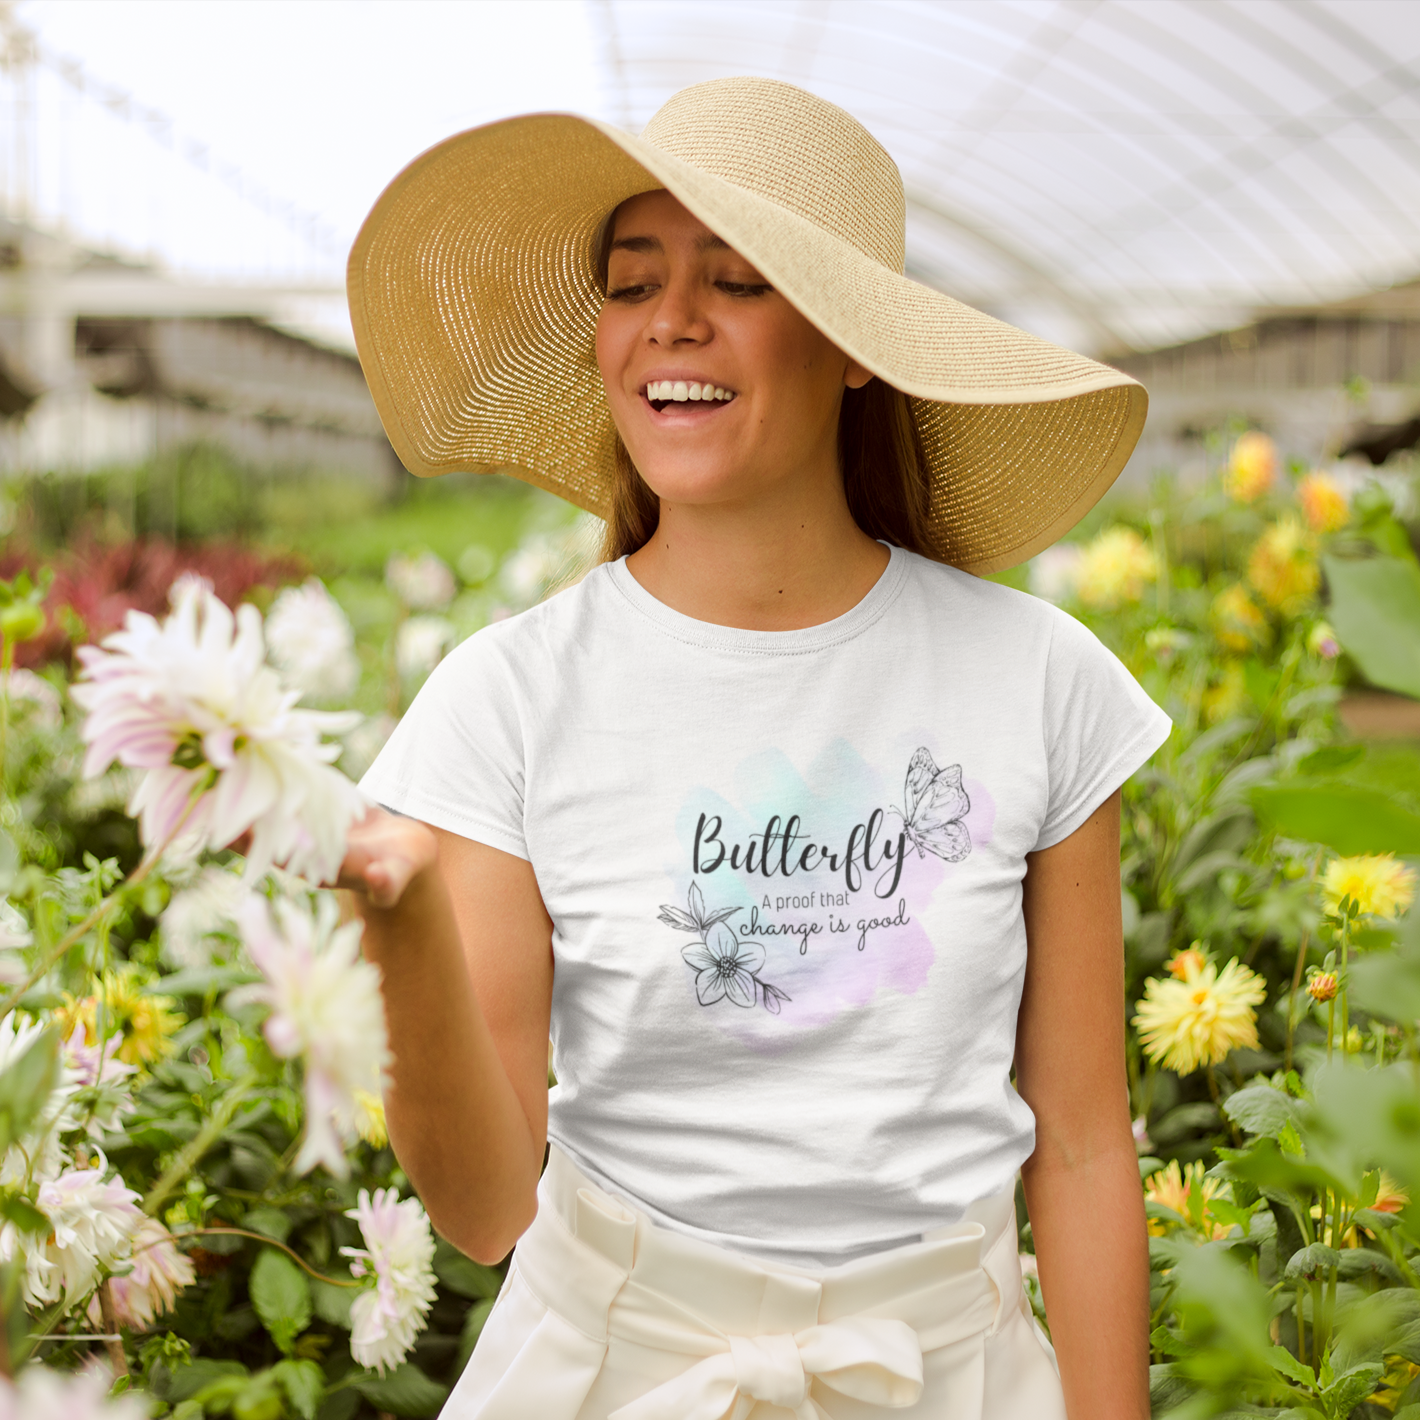 Story of Awakening Lifestyle Community Spirituality Relationships Love Light Meditation Oneness Earth Balance Healing Shop Store Charity Tree Nature Read Write T shirt Tops Tees Clothing Women Horoscope Organic Cotton Butterfly Proof That Change Is Good Quote